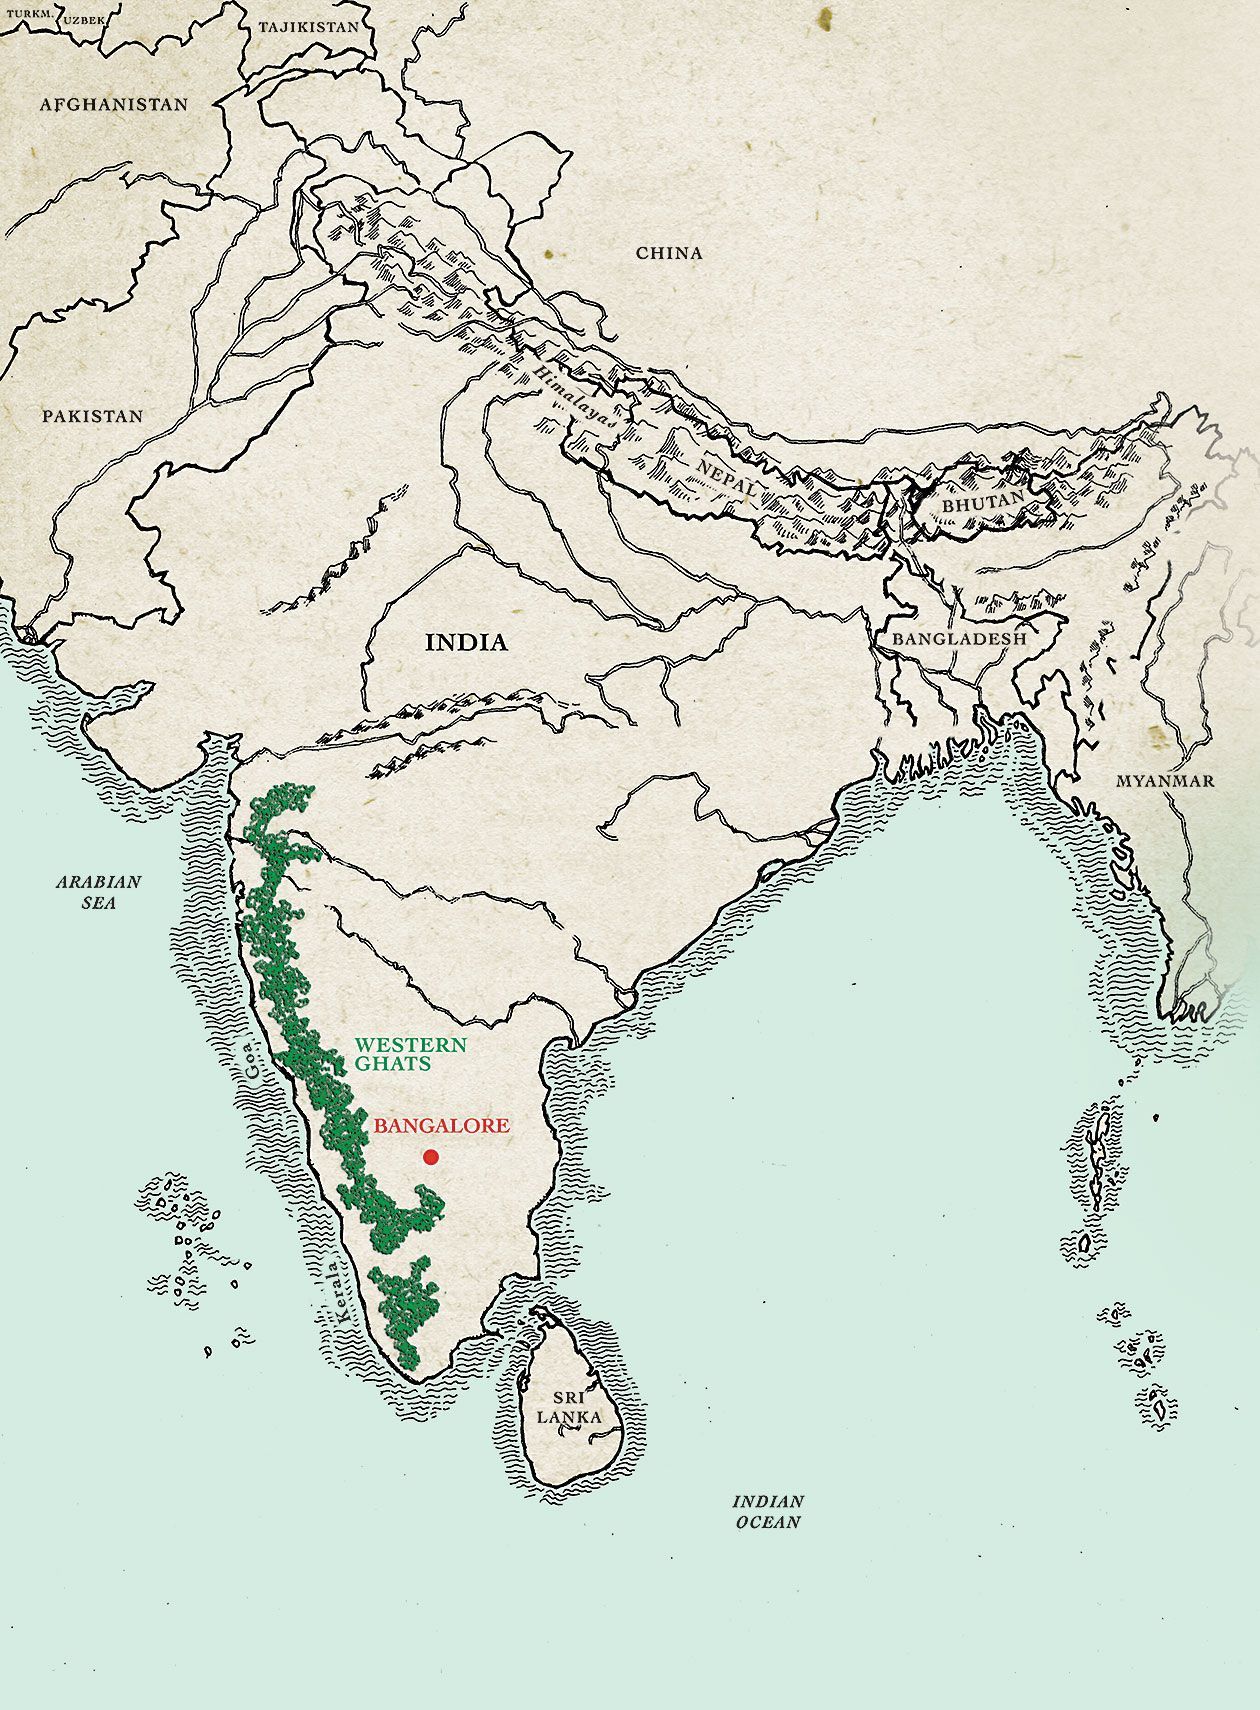 Map of the Western Ghats mountain range in India.